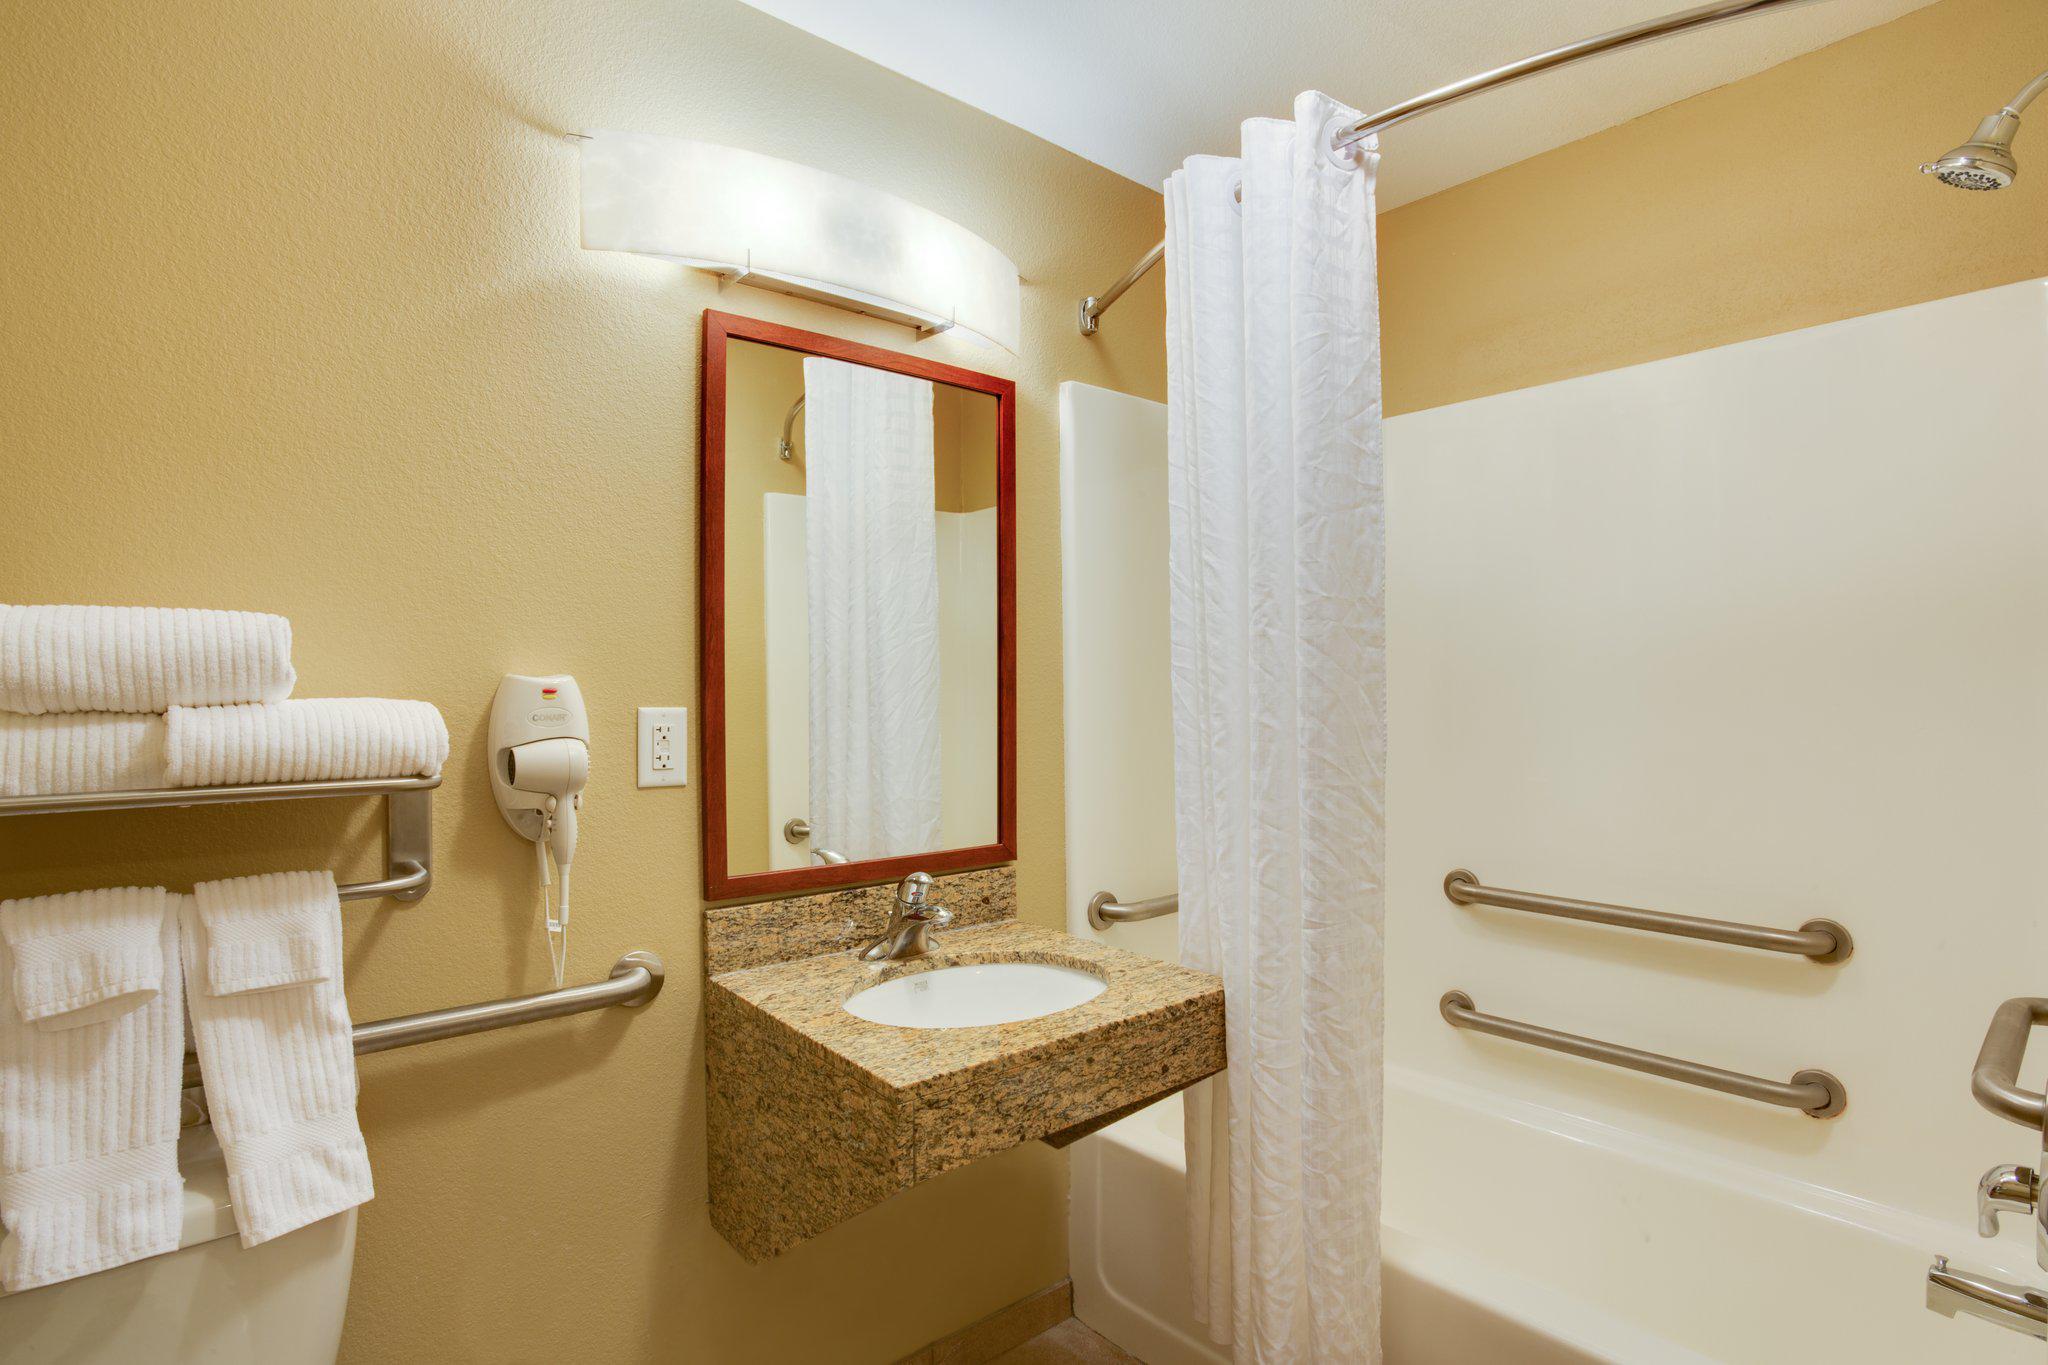 Candlewood Suites Tallahassee Photo